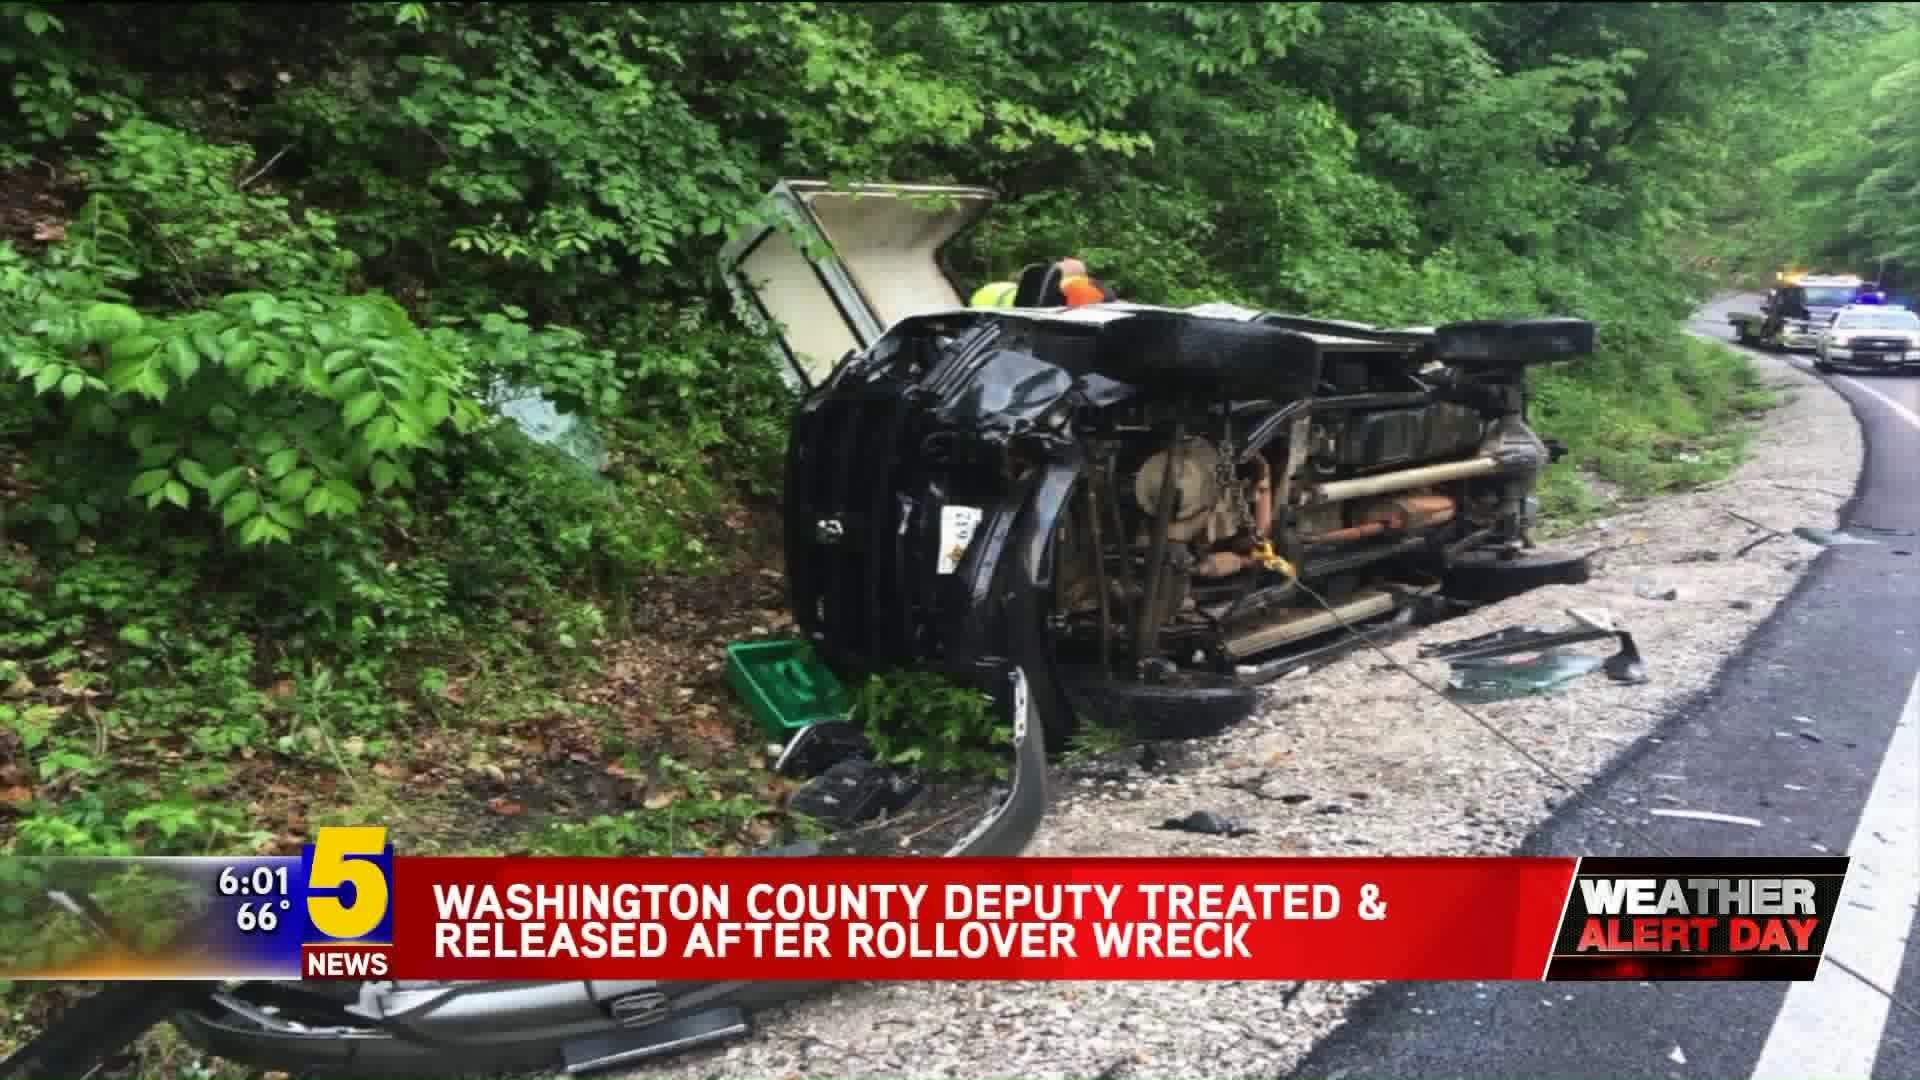 Washington County Deputy Treated & Released After Rollover Wreck